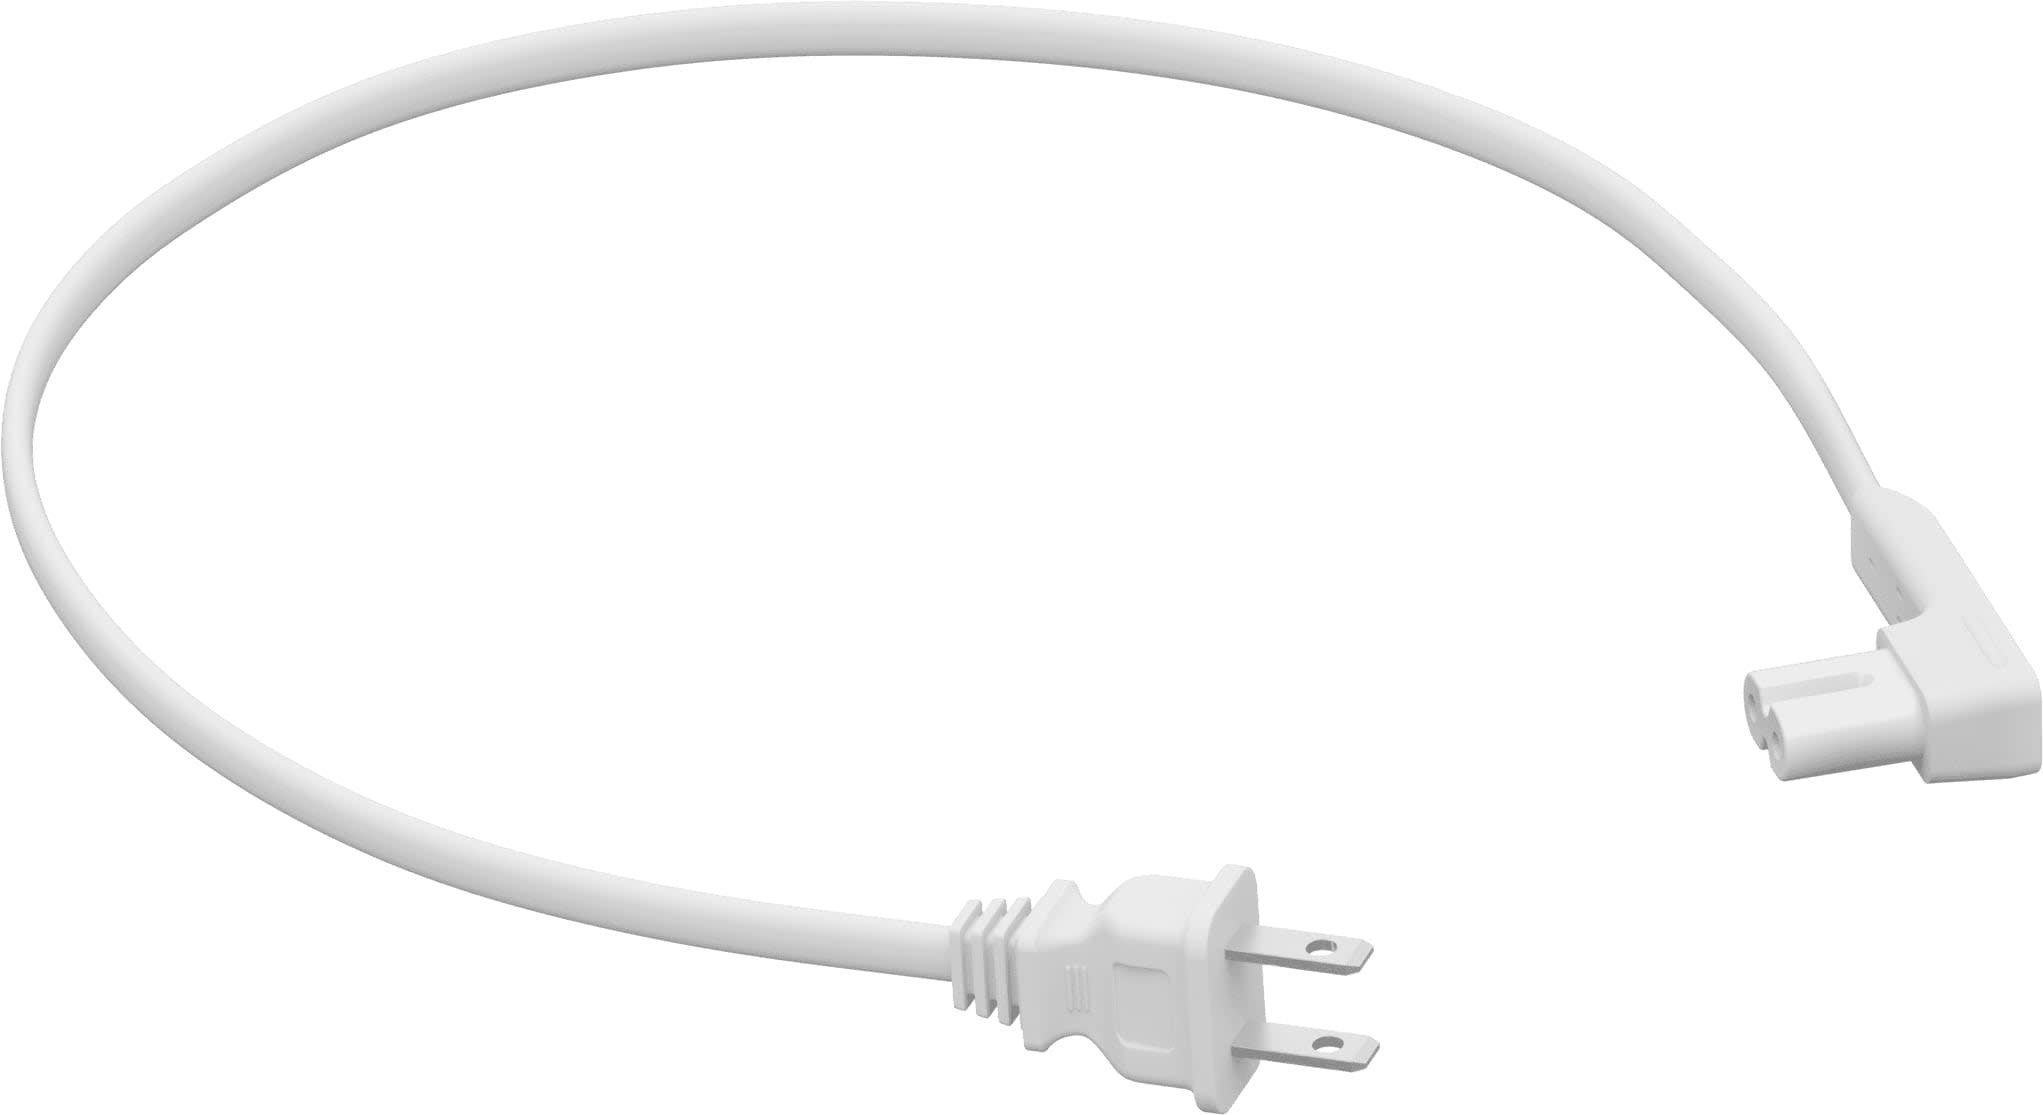 One/Play:1 Power Cable — The